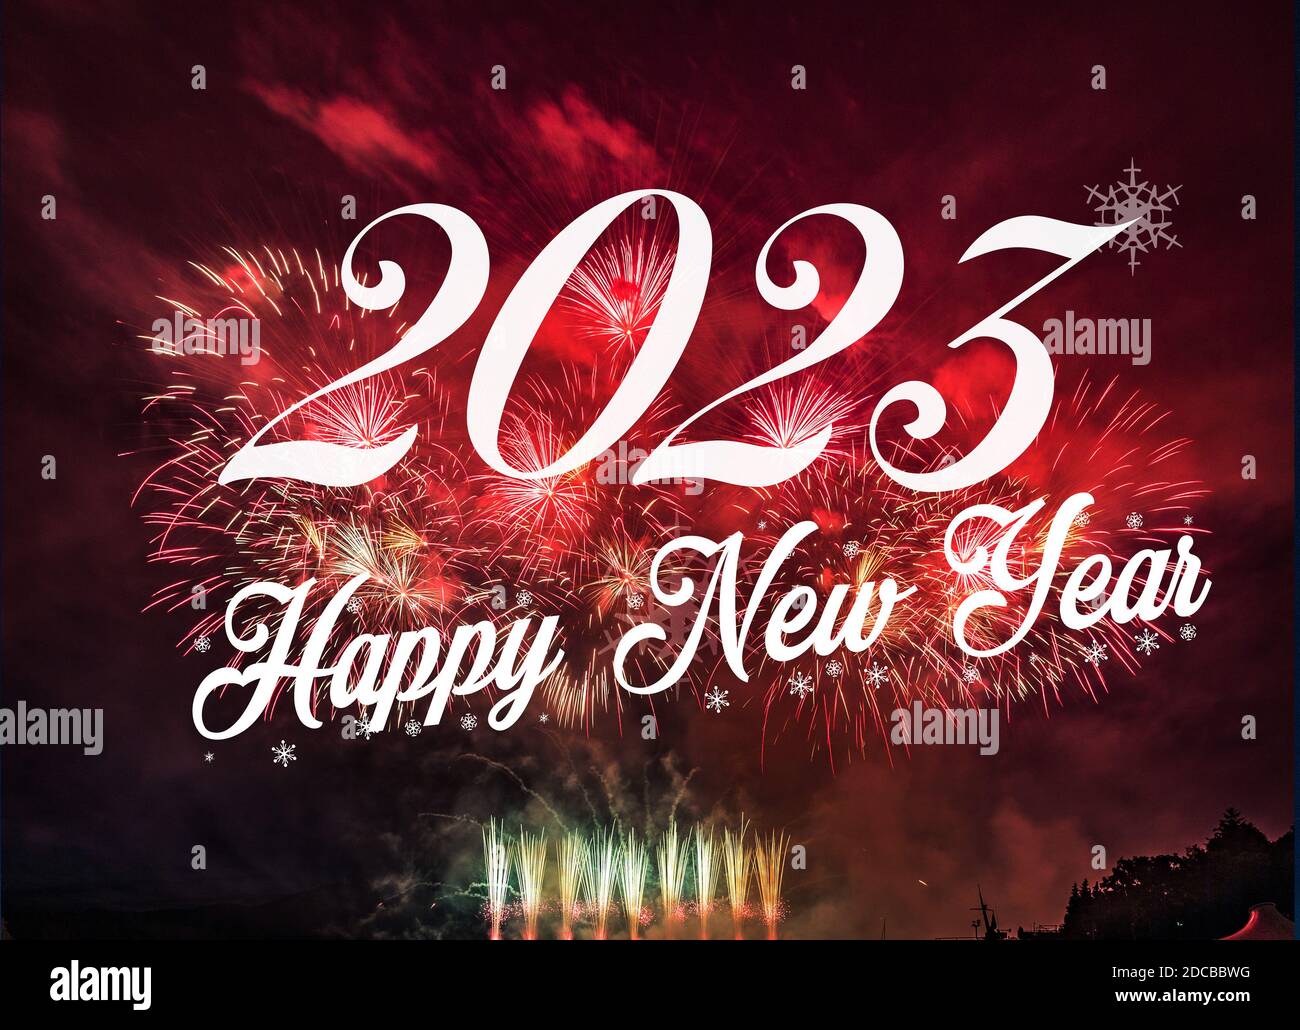 Happy New Year 2023 With Fireworks Background Celebration New Year